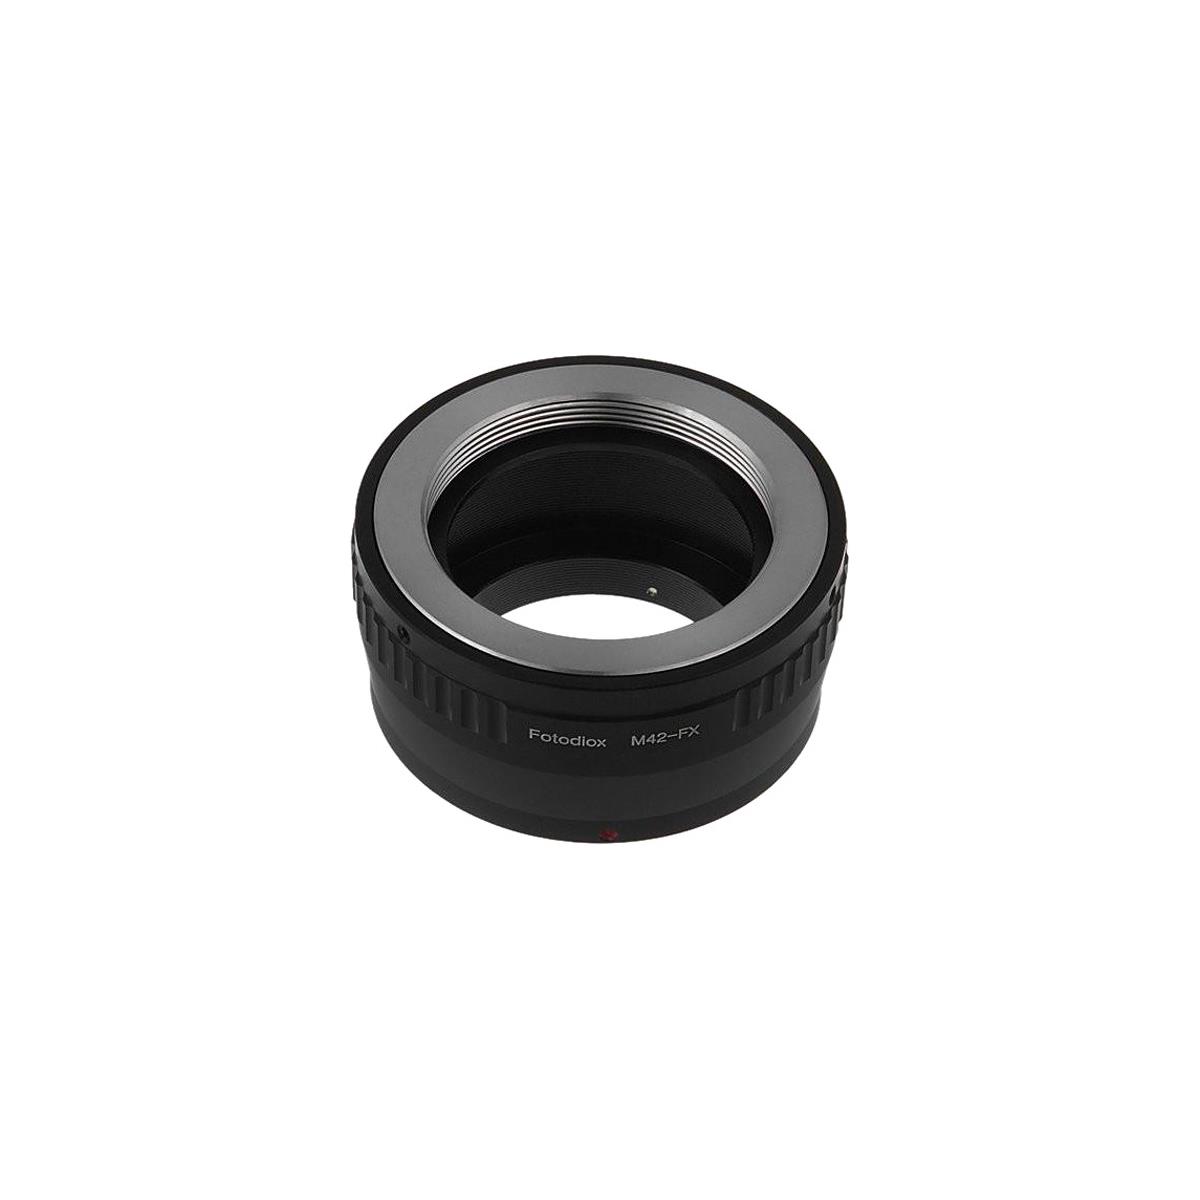 Image of Fotodiox Lens Mount Adapter for M42 Screw Mount SLR Lens to Fuji X Camera